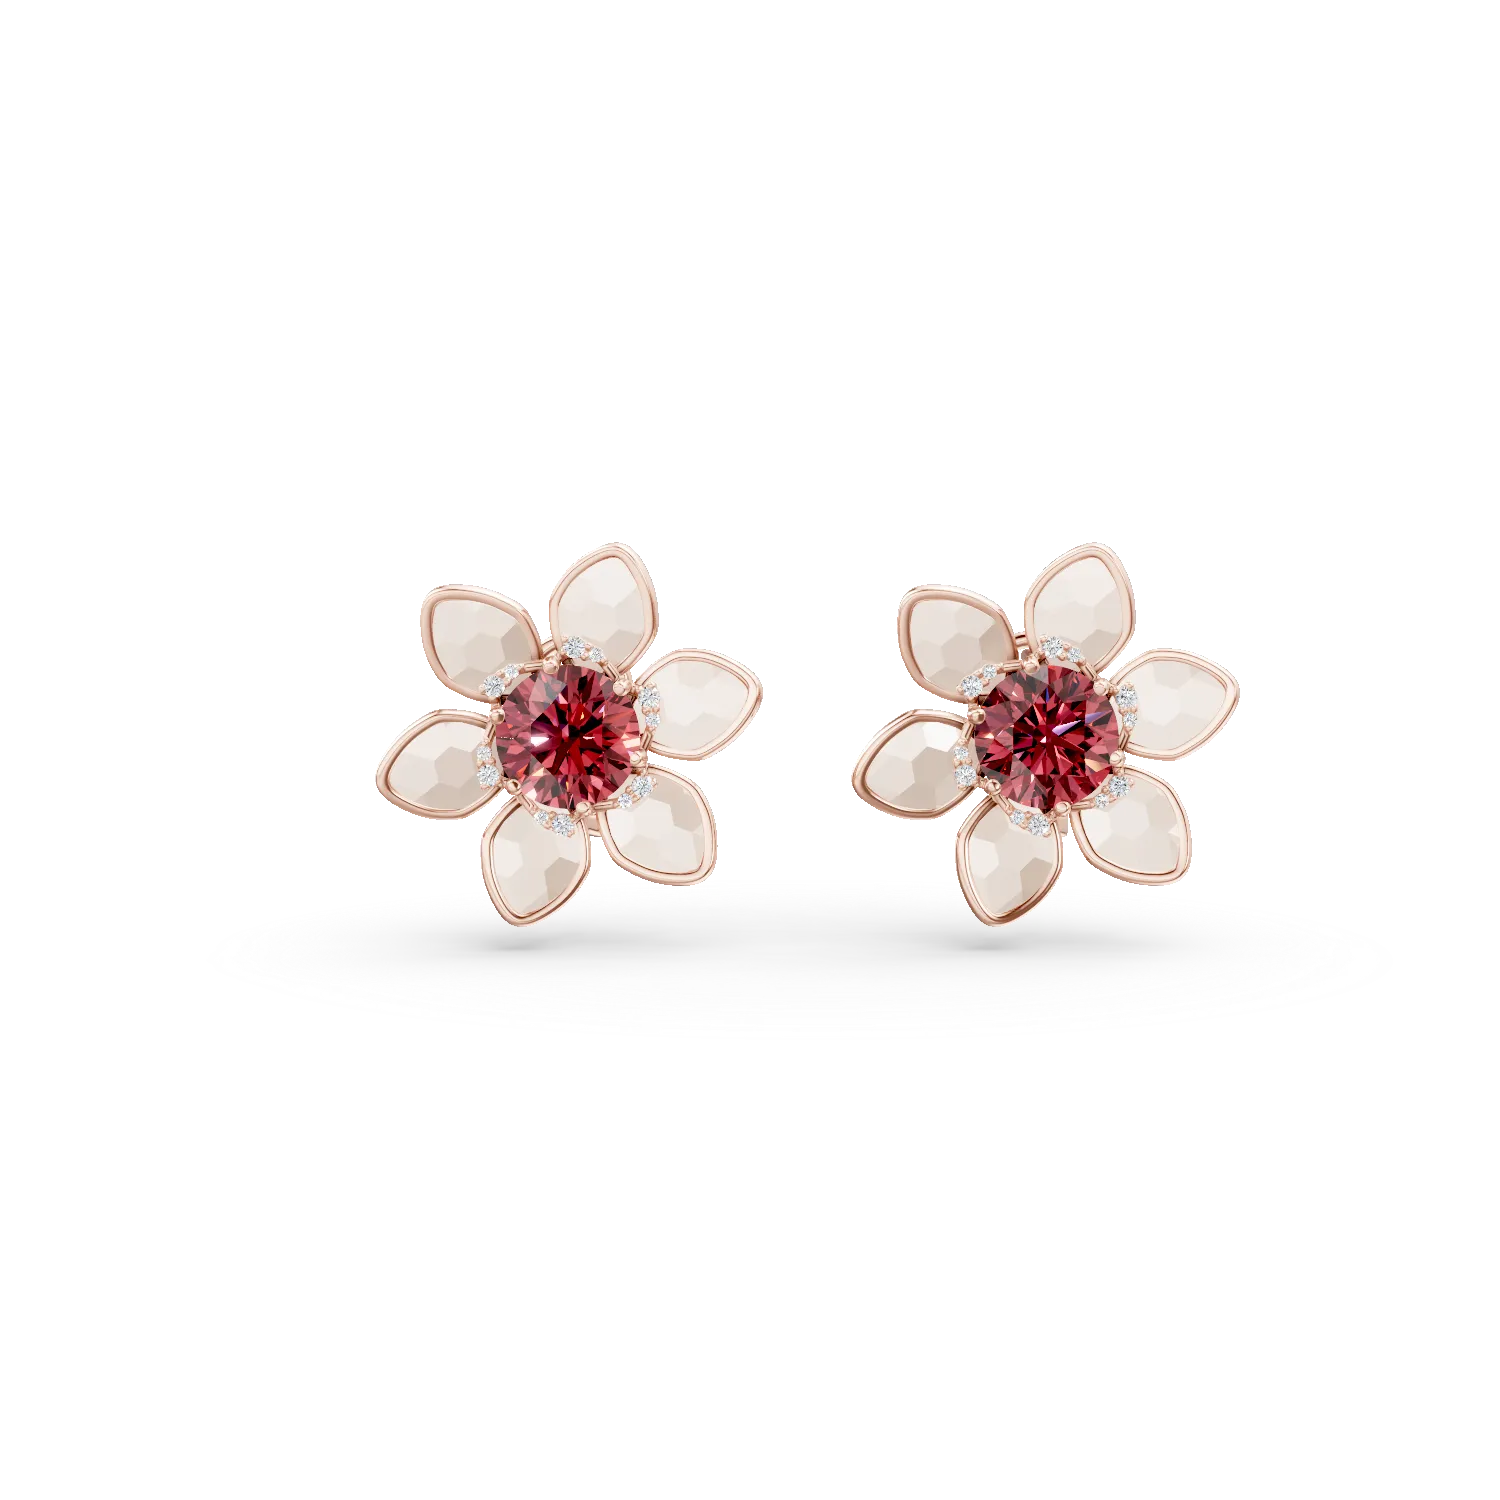 Rose gold flower earrings with 11.9ct precious and semi-precious stones